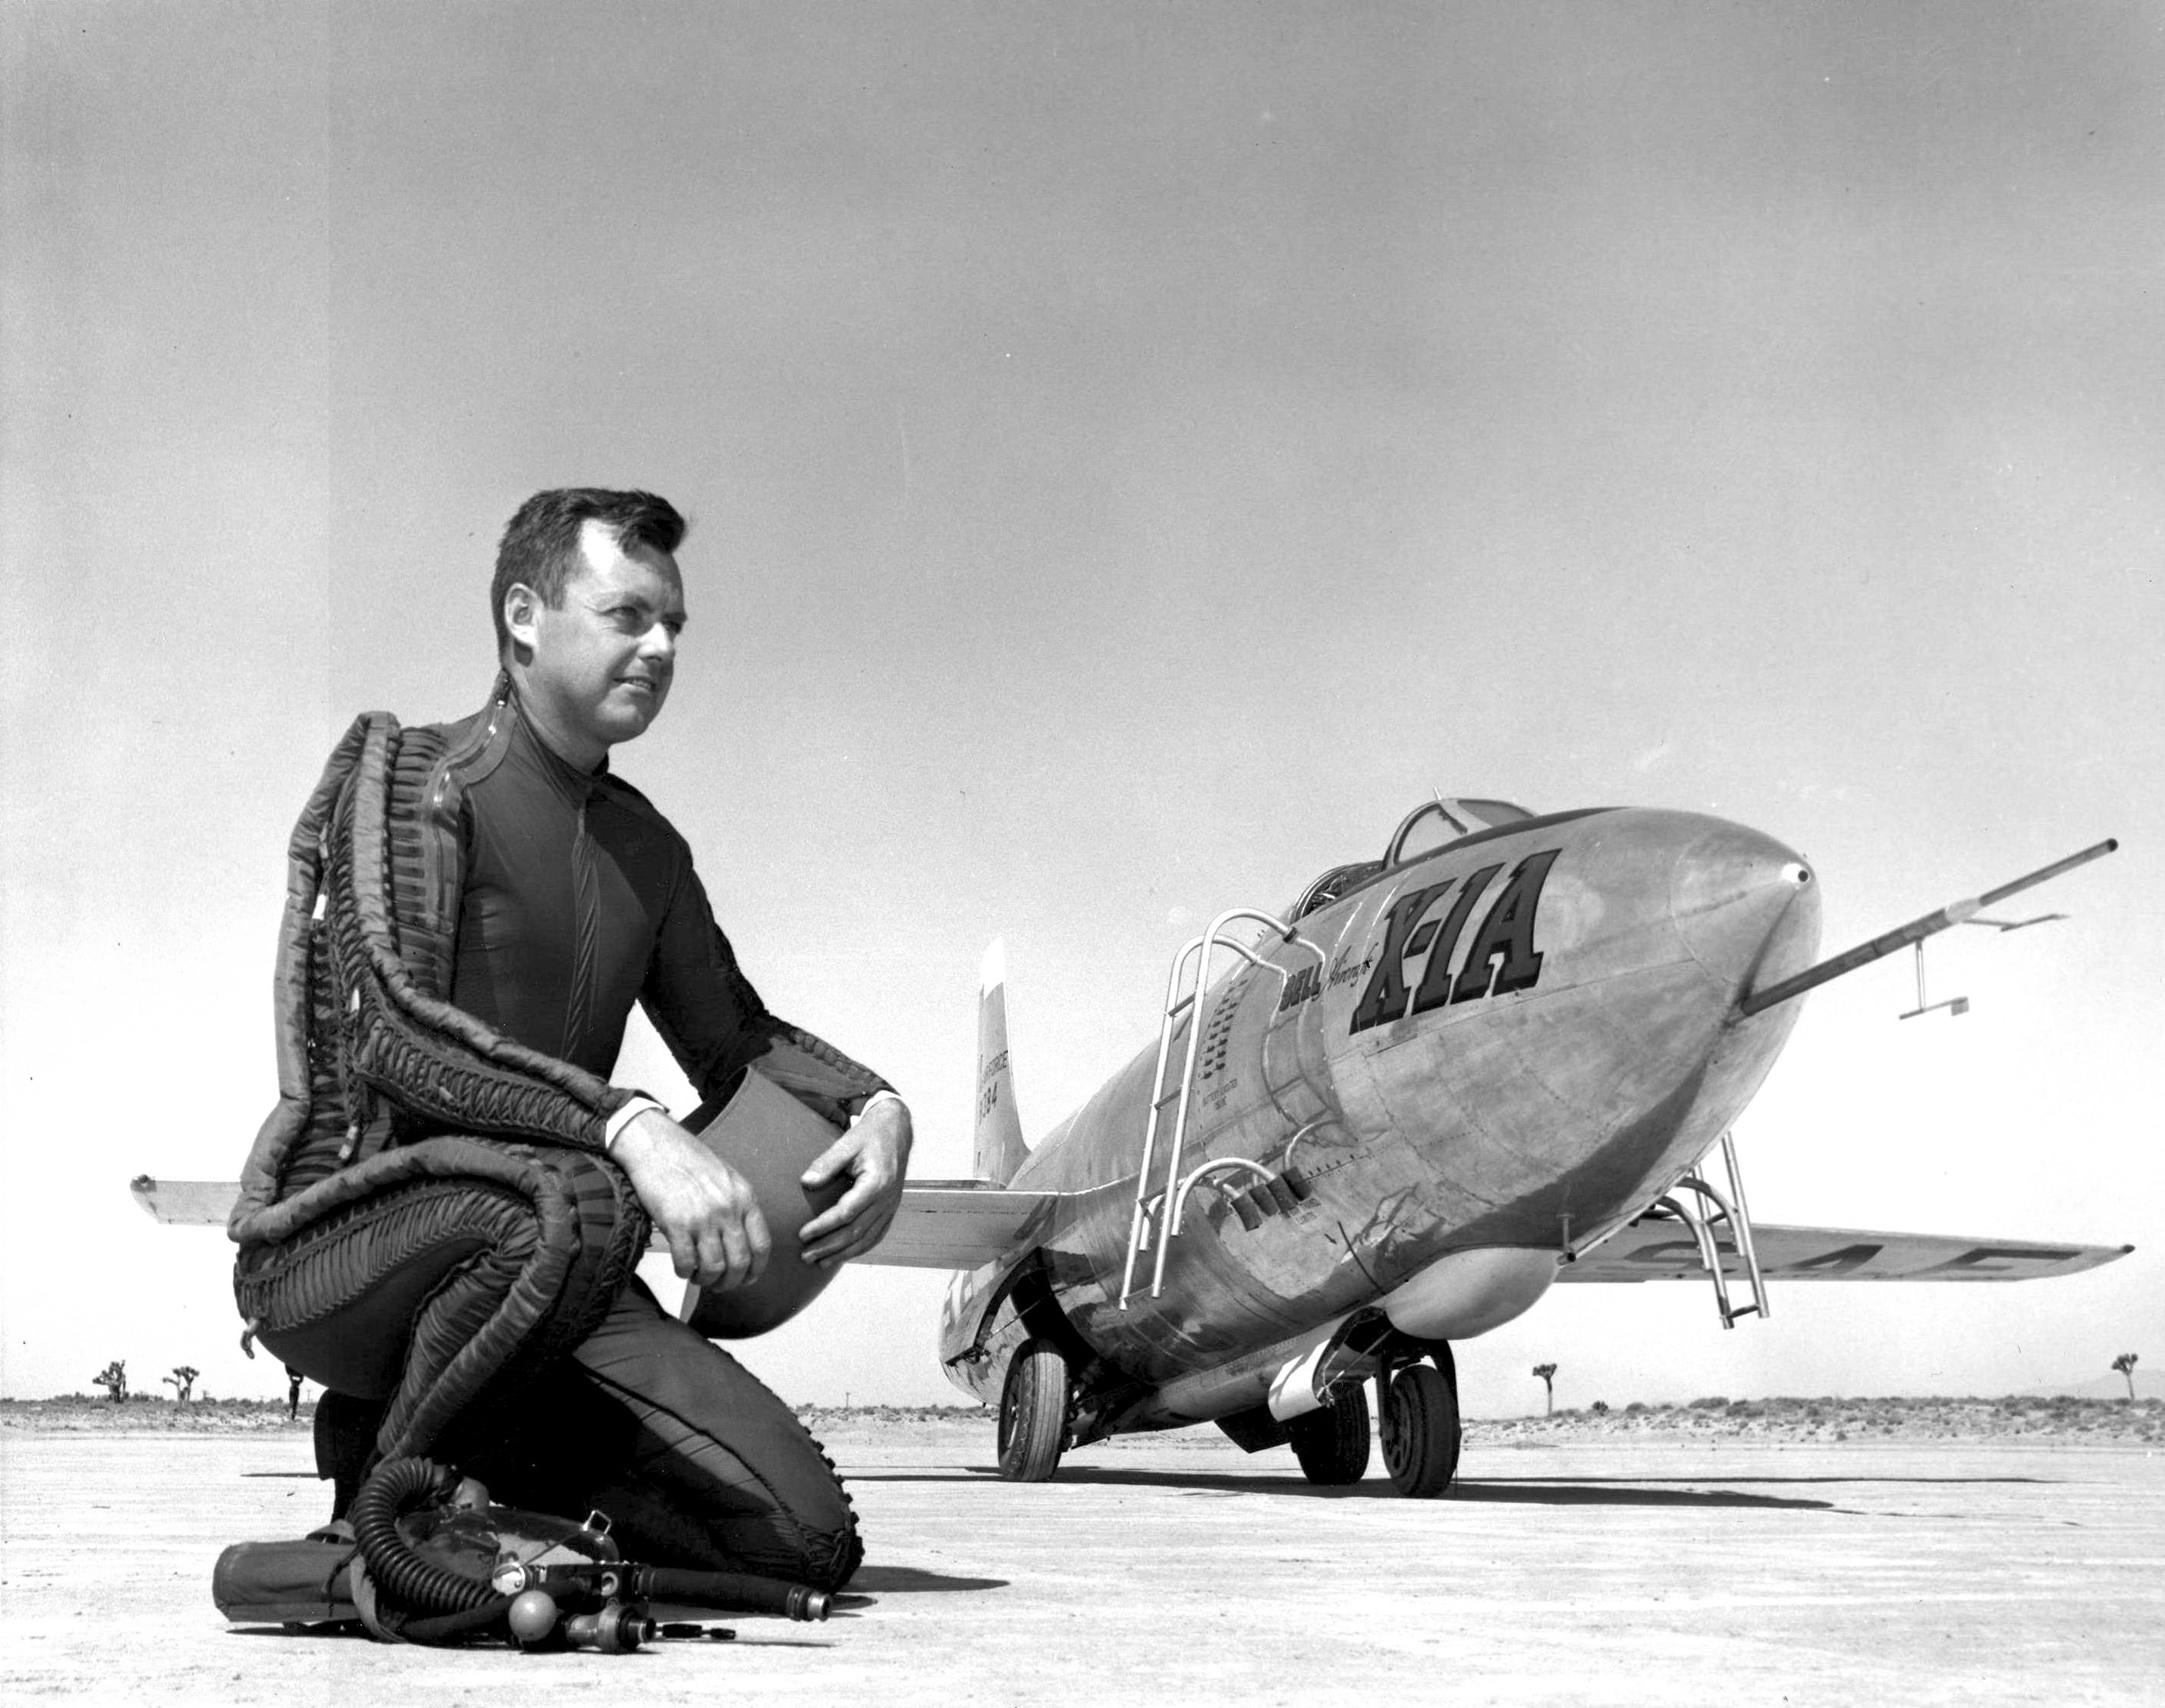 Major Arthur Warren "Kit" Murray, U.S. Air Force, with the Bell X-1A at Edwards AFB, 20 July 1954. Major Murray is wearing a David Clark Co. T-1 capstan-type partial-pressure suit with a K-1 helmet. (NASA)